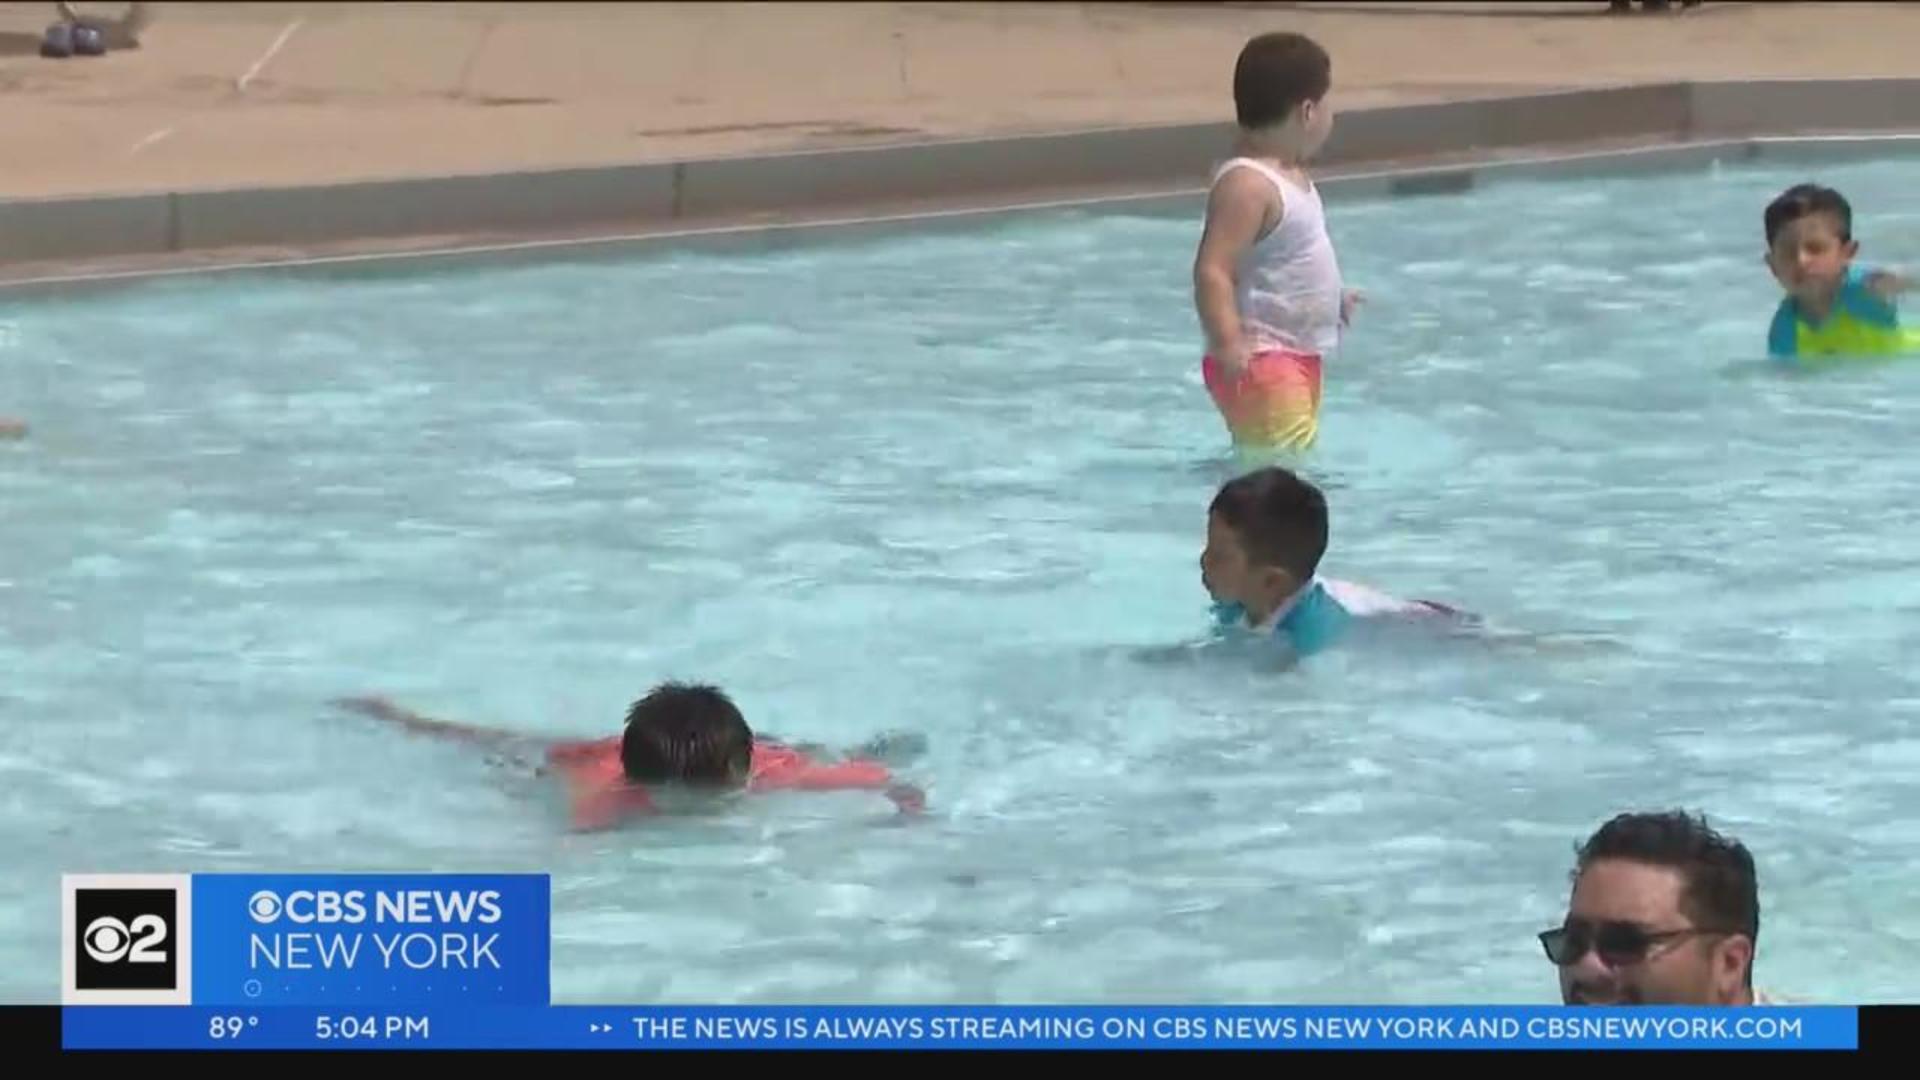 Dangerously high temperatures in Tri-State Area expected to continue Friday 